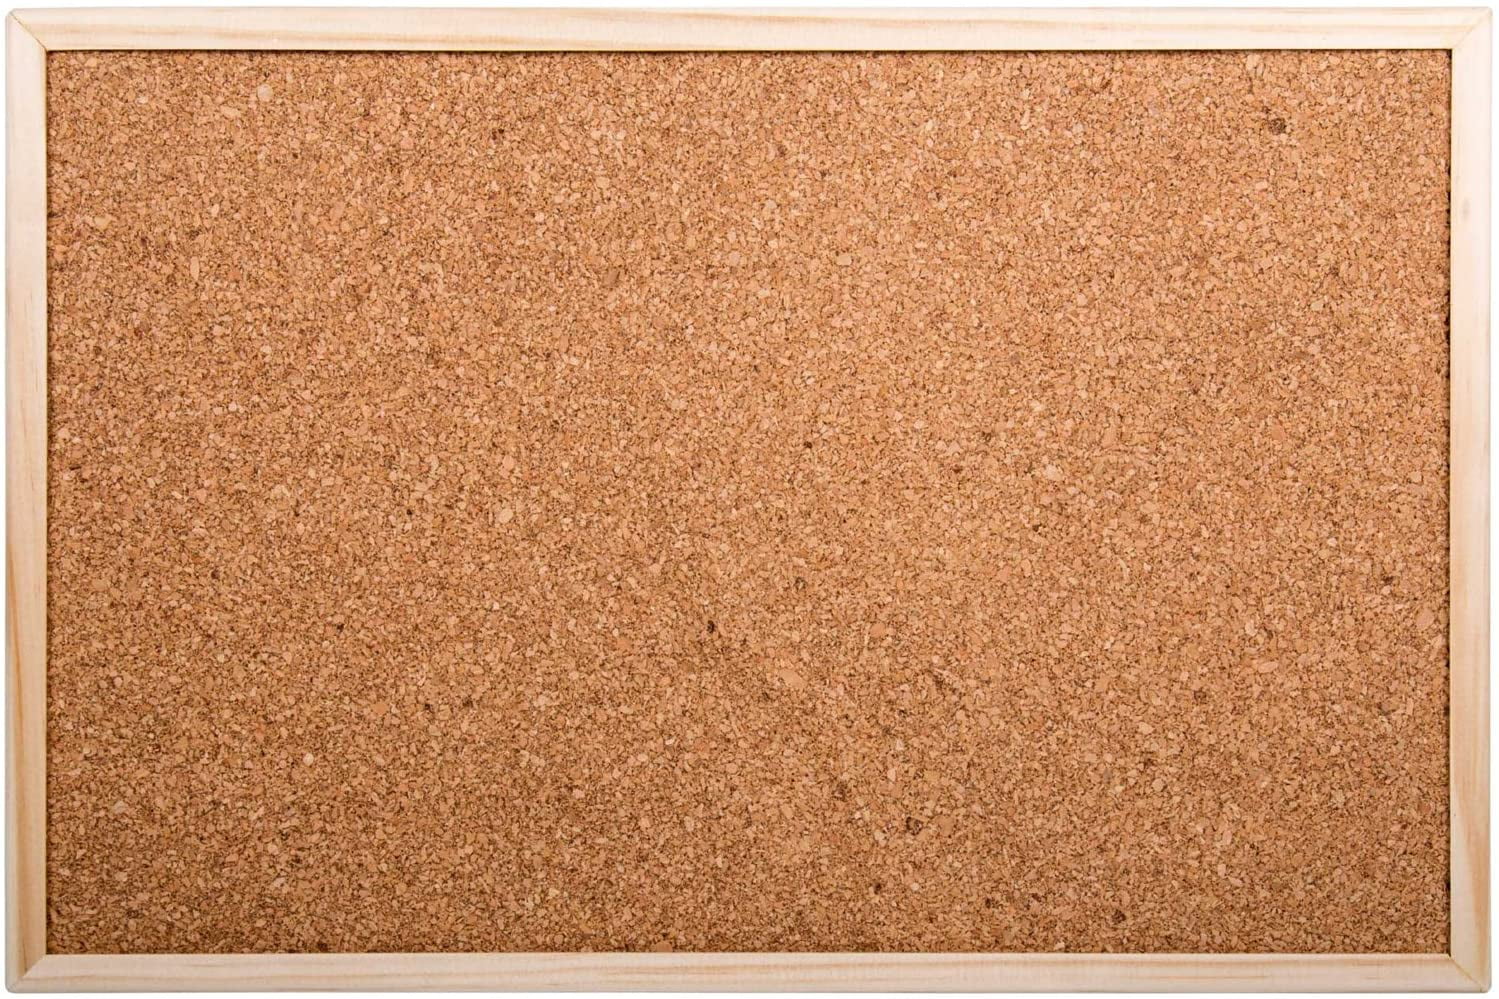 Ai-office Magnetic Cork Board Bulletin Board,12x16 inches pushpins and Power Magnet Supplied corkboard with Aluminium Frame,Decorative Easy Hang Cork Bulletin Board for Wall for Office for Home 